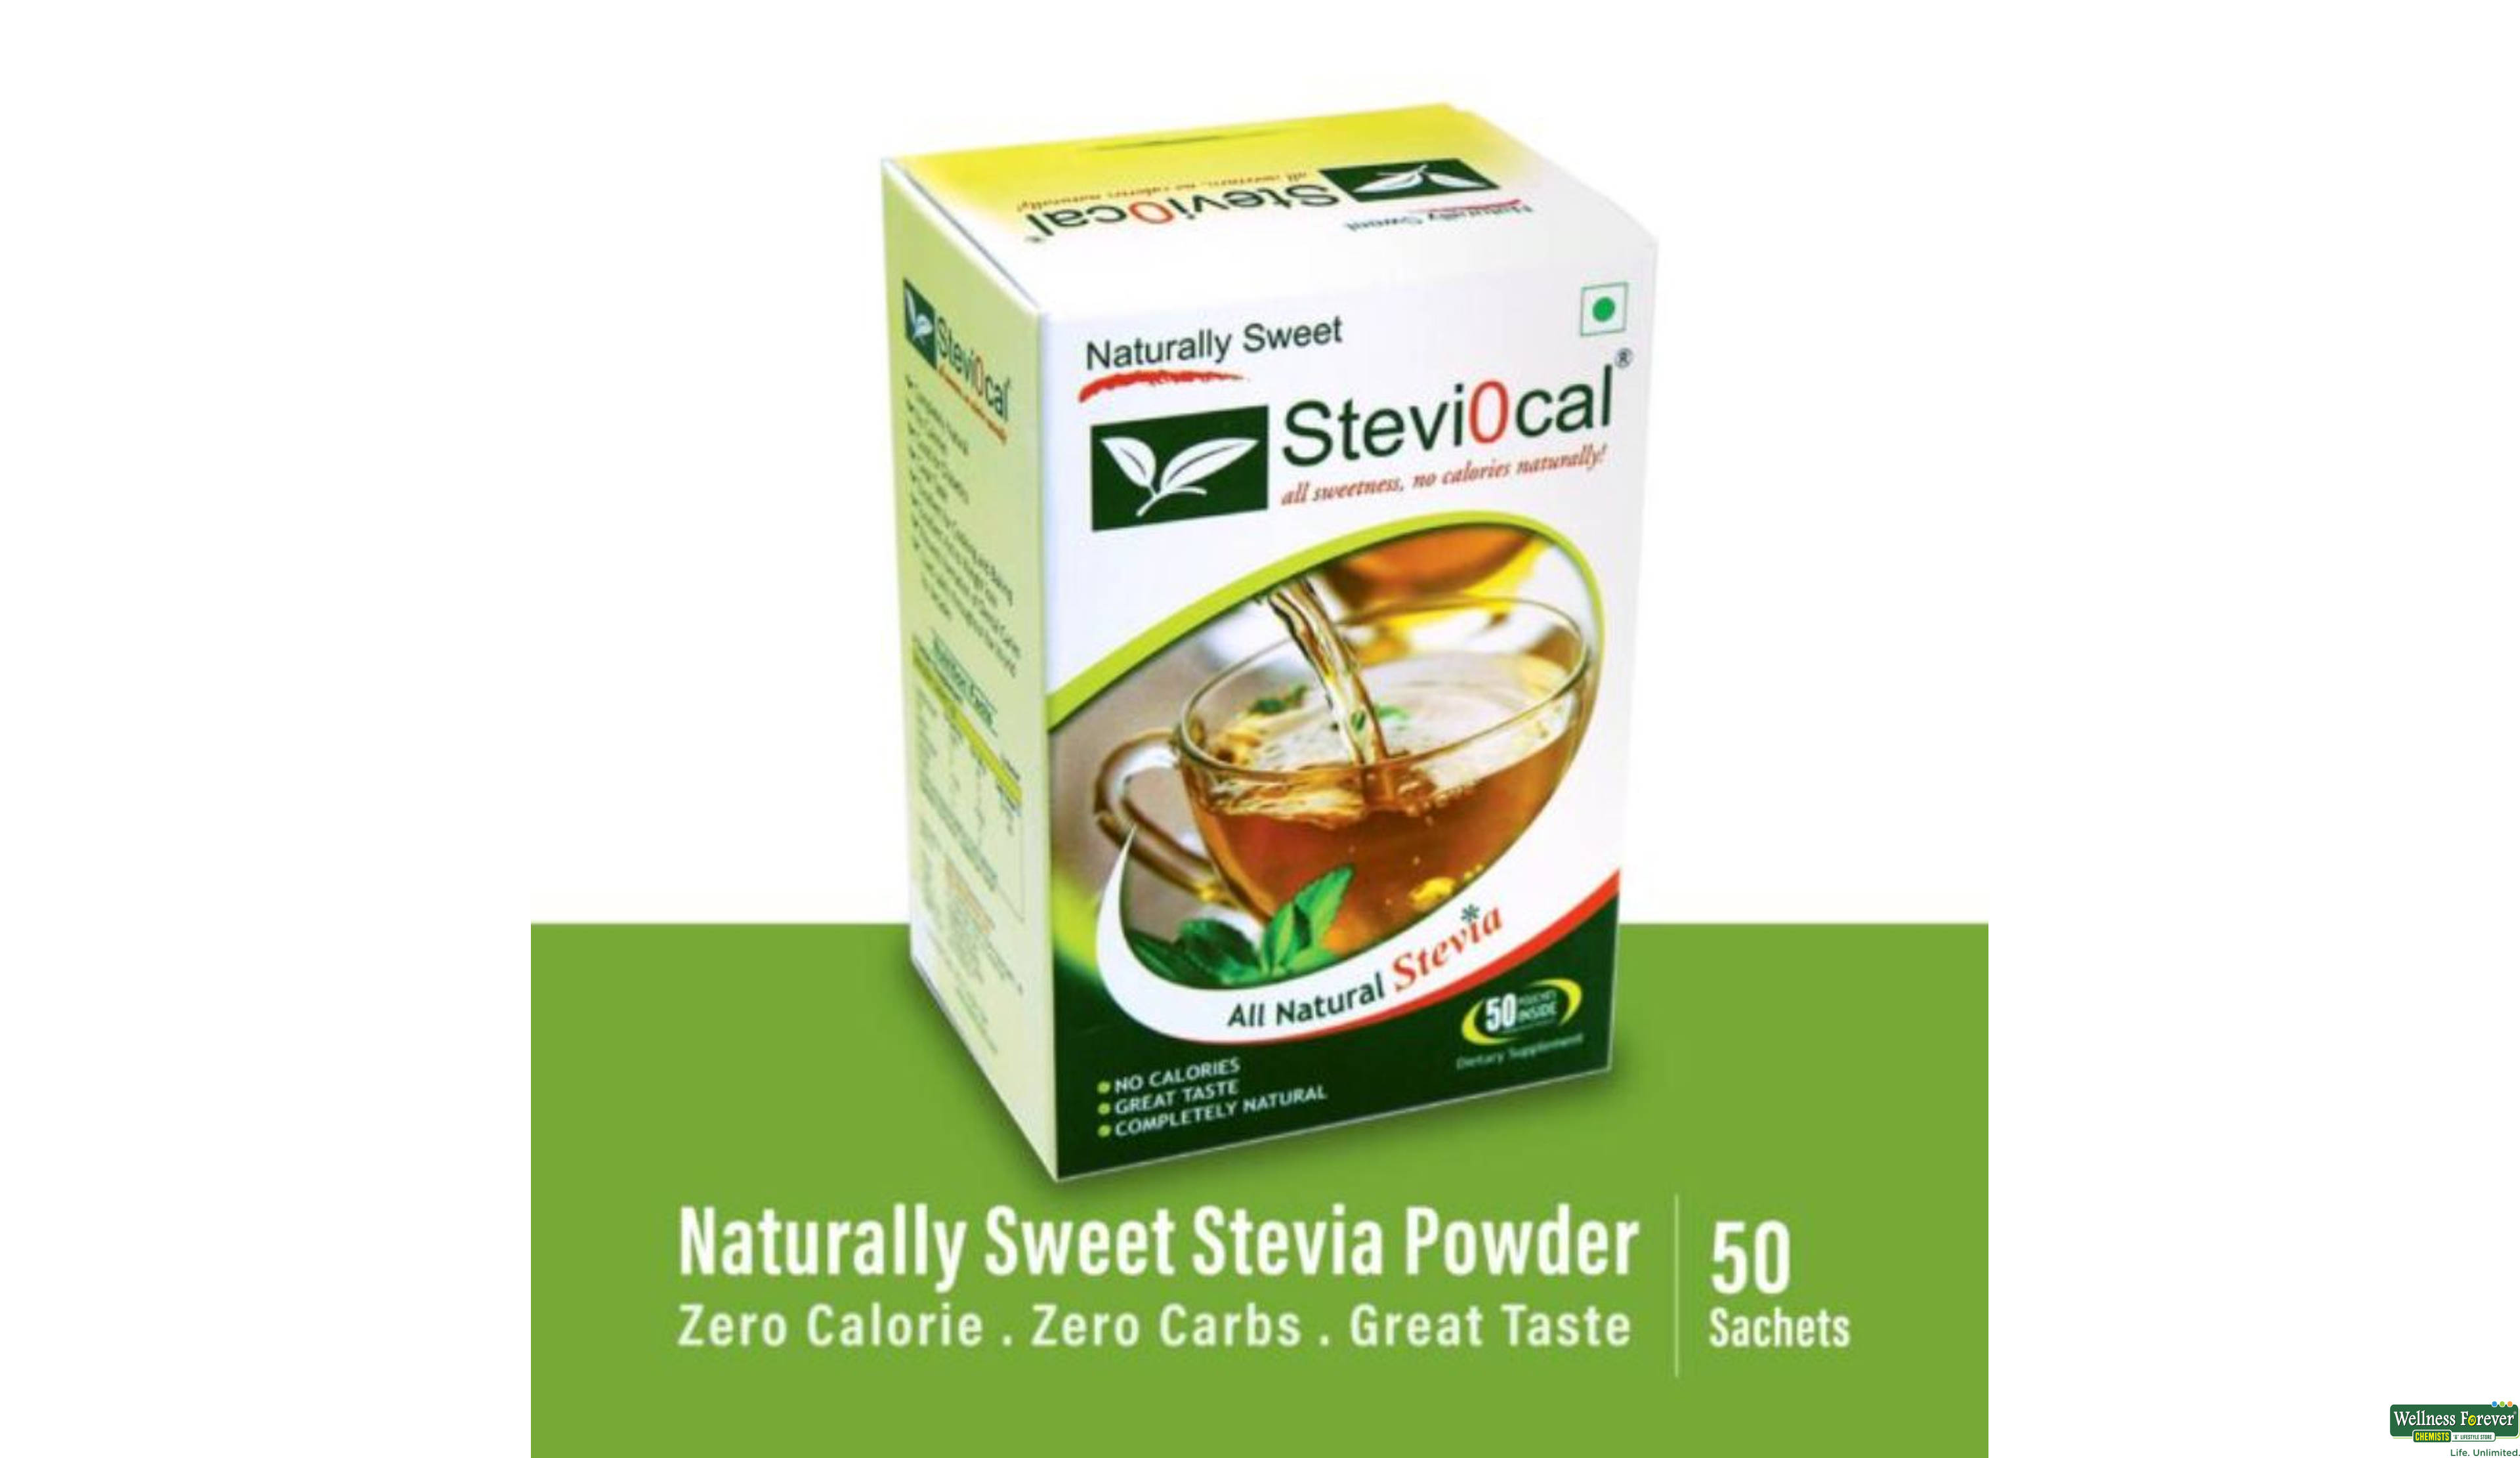 STEVI0CAL NATURLLY SWEET SACH 50PC- 3, 50PC, null